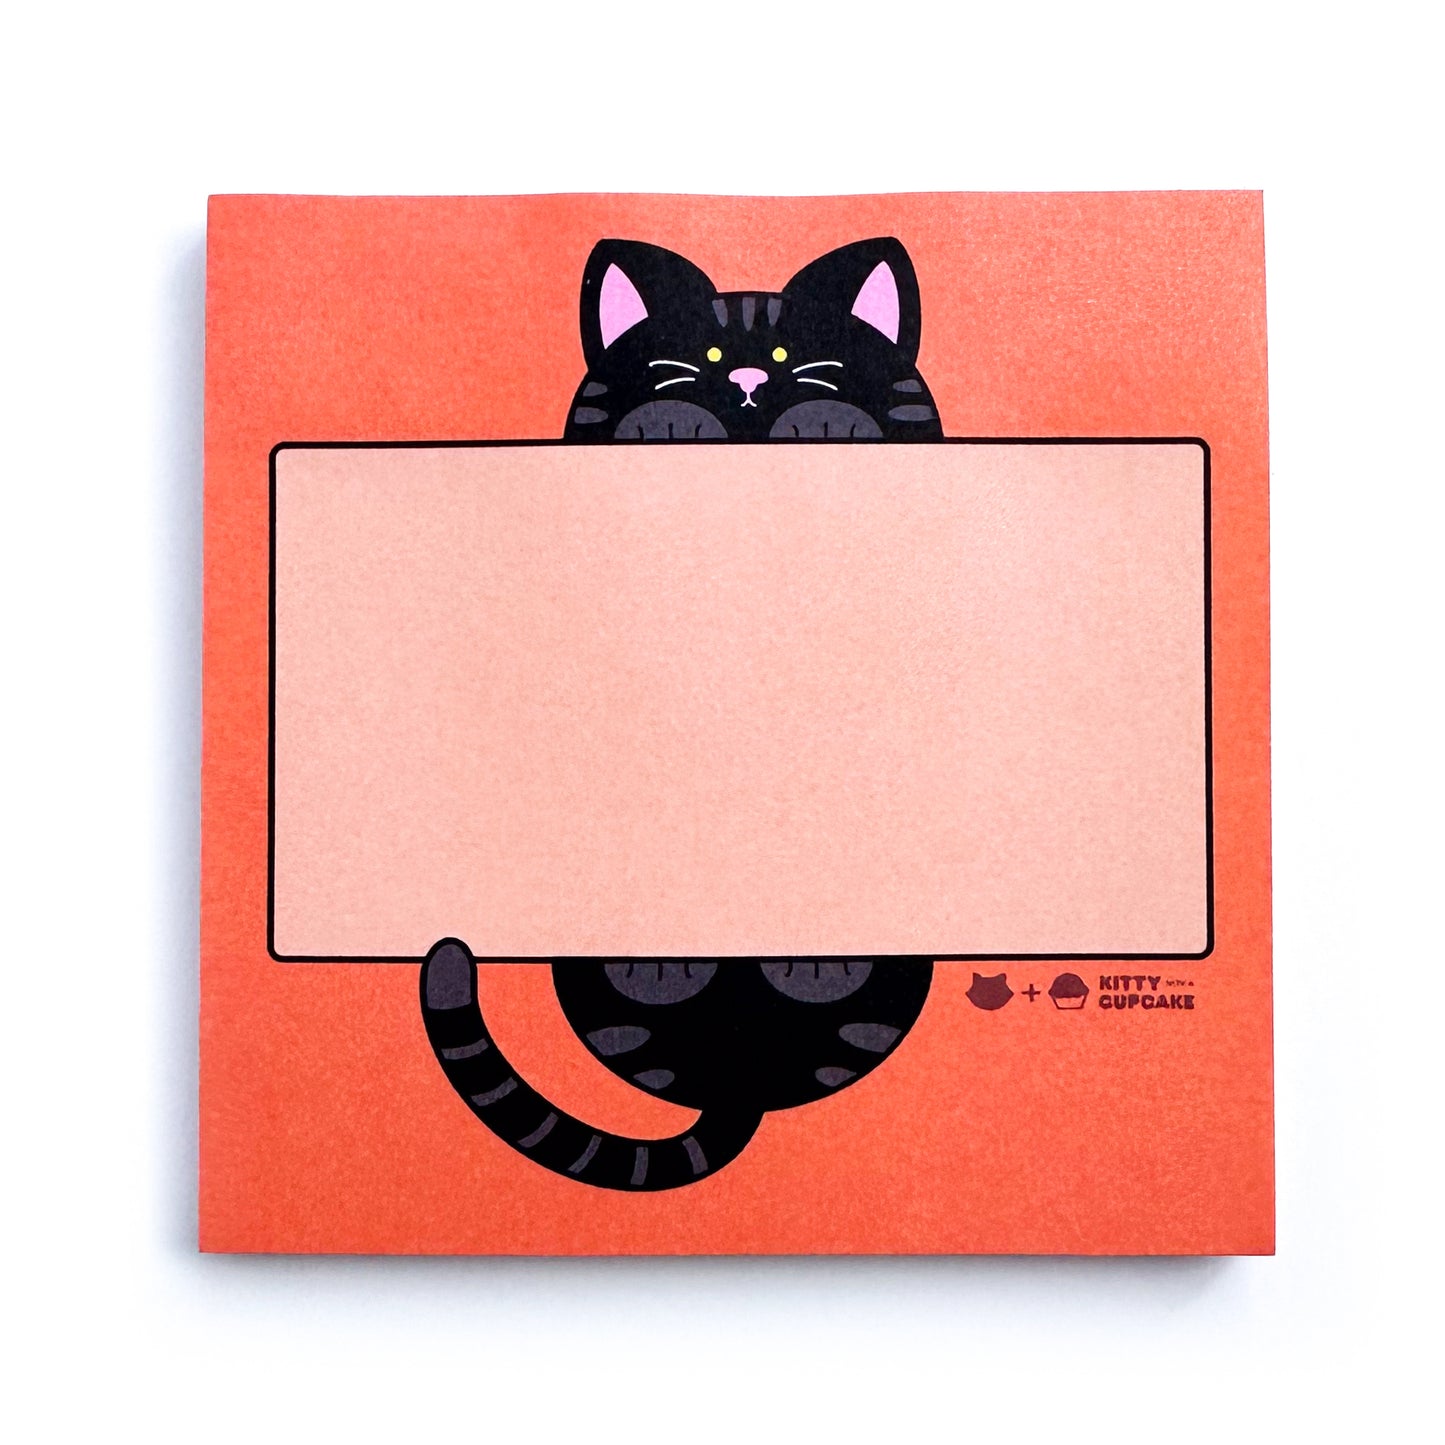 A pad of square orange sticky notes featuring a lighter orange rectangle for writing with a cute illustration of a cat holding this rectangle. The cat is black and it's head is above the rectangle and it's butt is below the rectangle